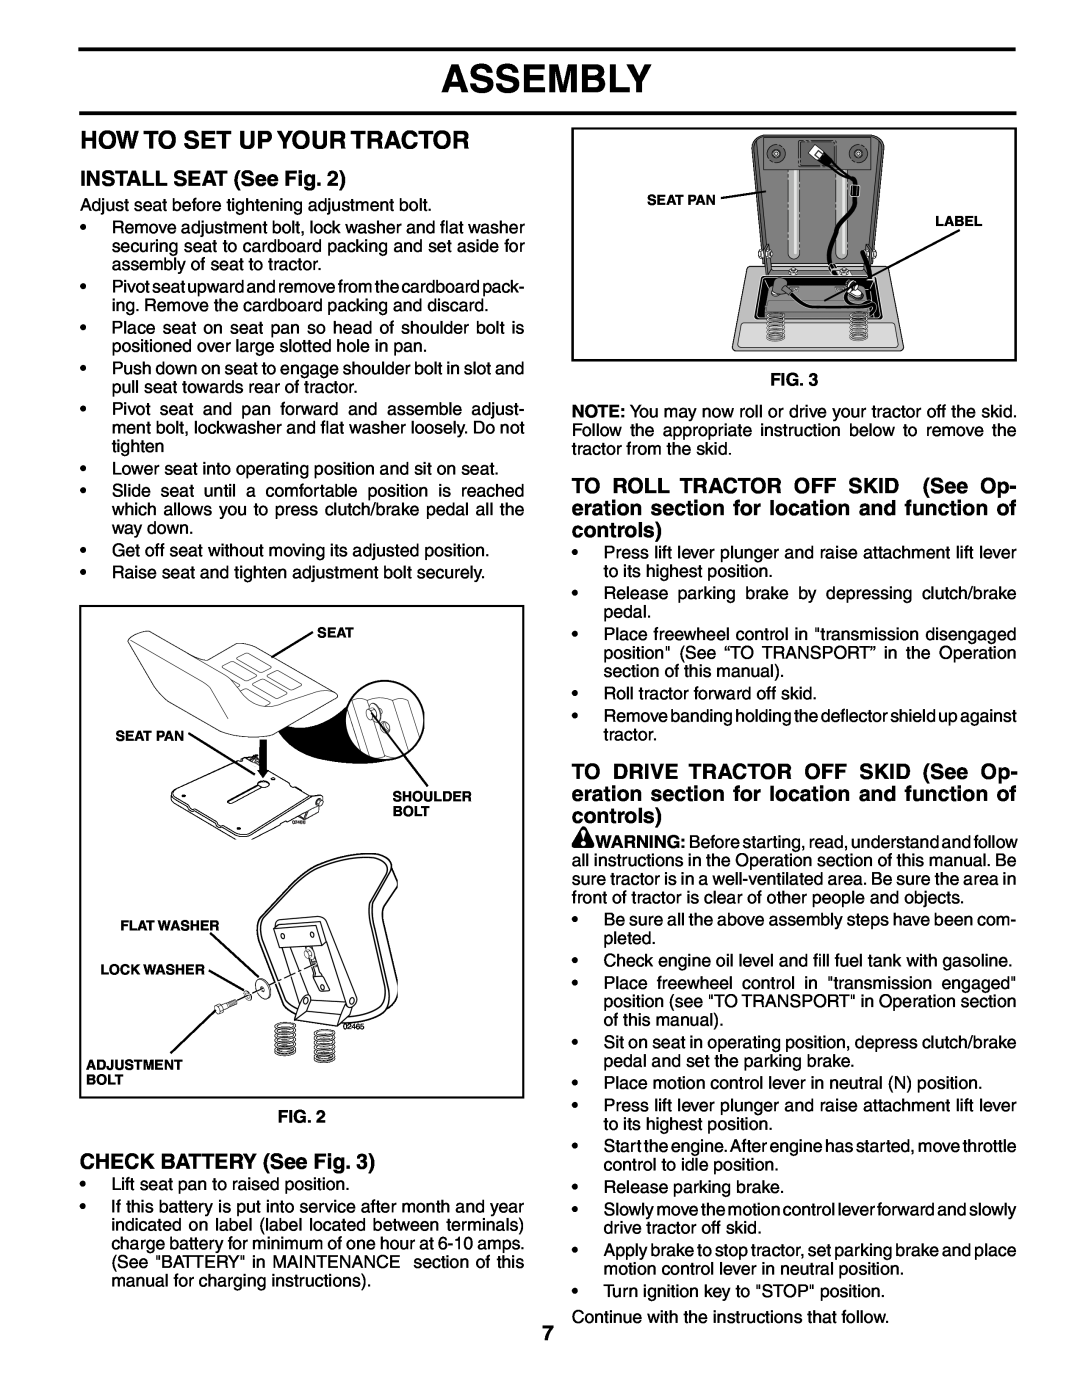 Poulan PO175H42STB manual How To Set Up Your Tractor, INSTALL SEAT See Fig, CHECK BATTERY See Fig, Assembly 